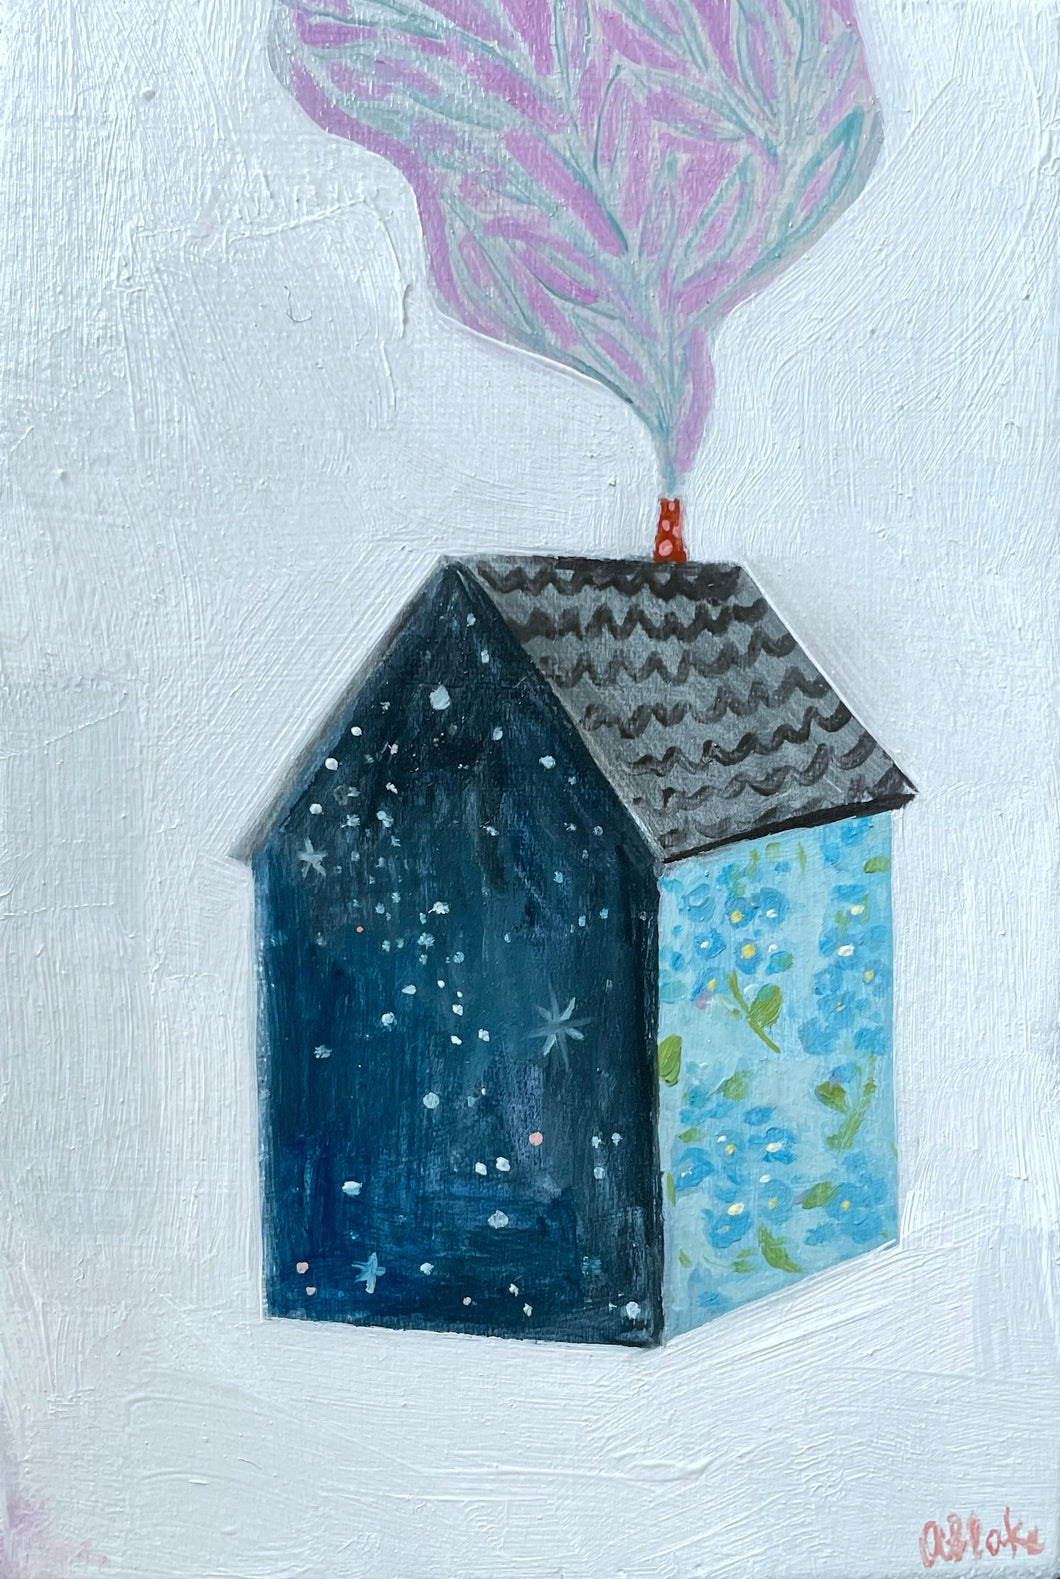 A home made of starlight and memories